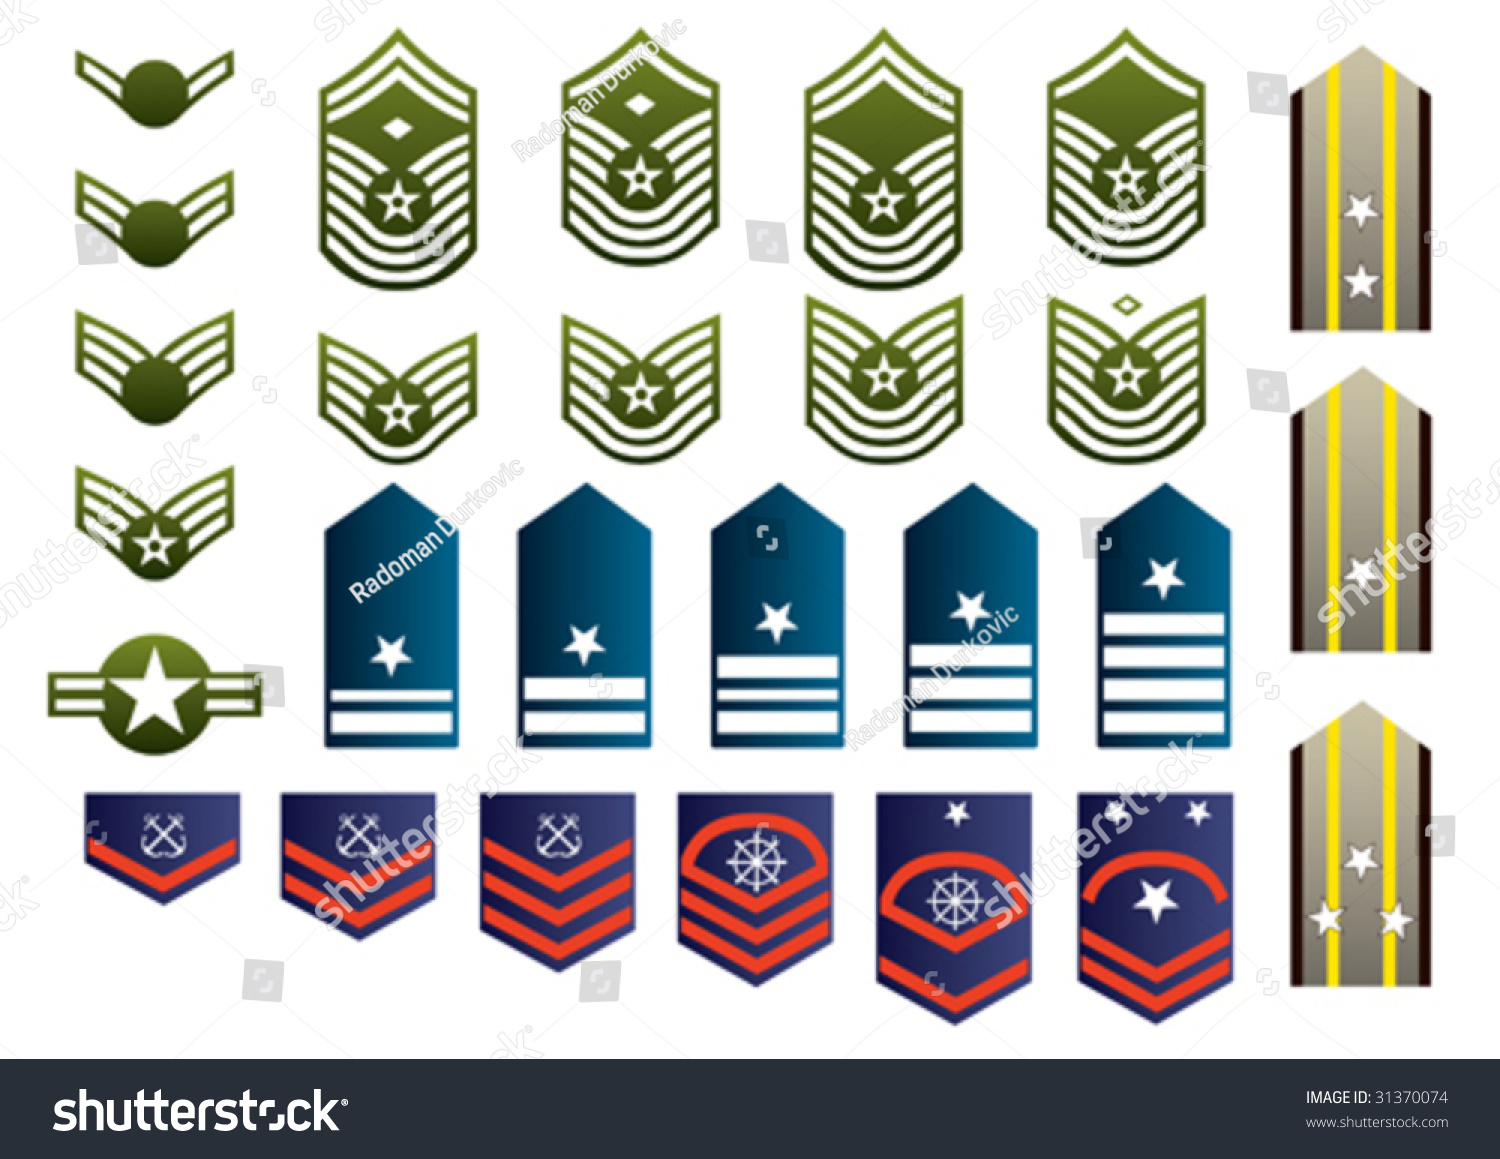 military badges clipart - photo #39